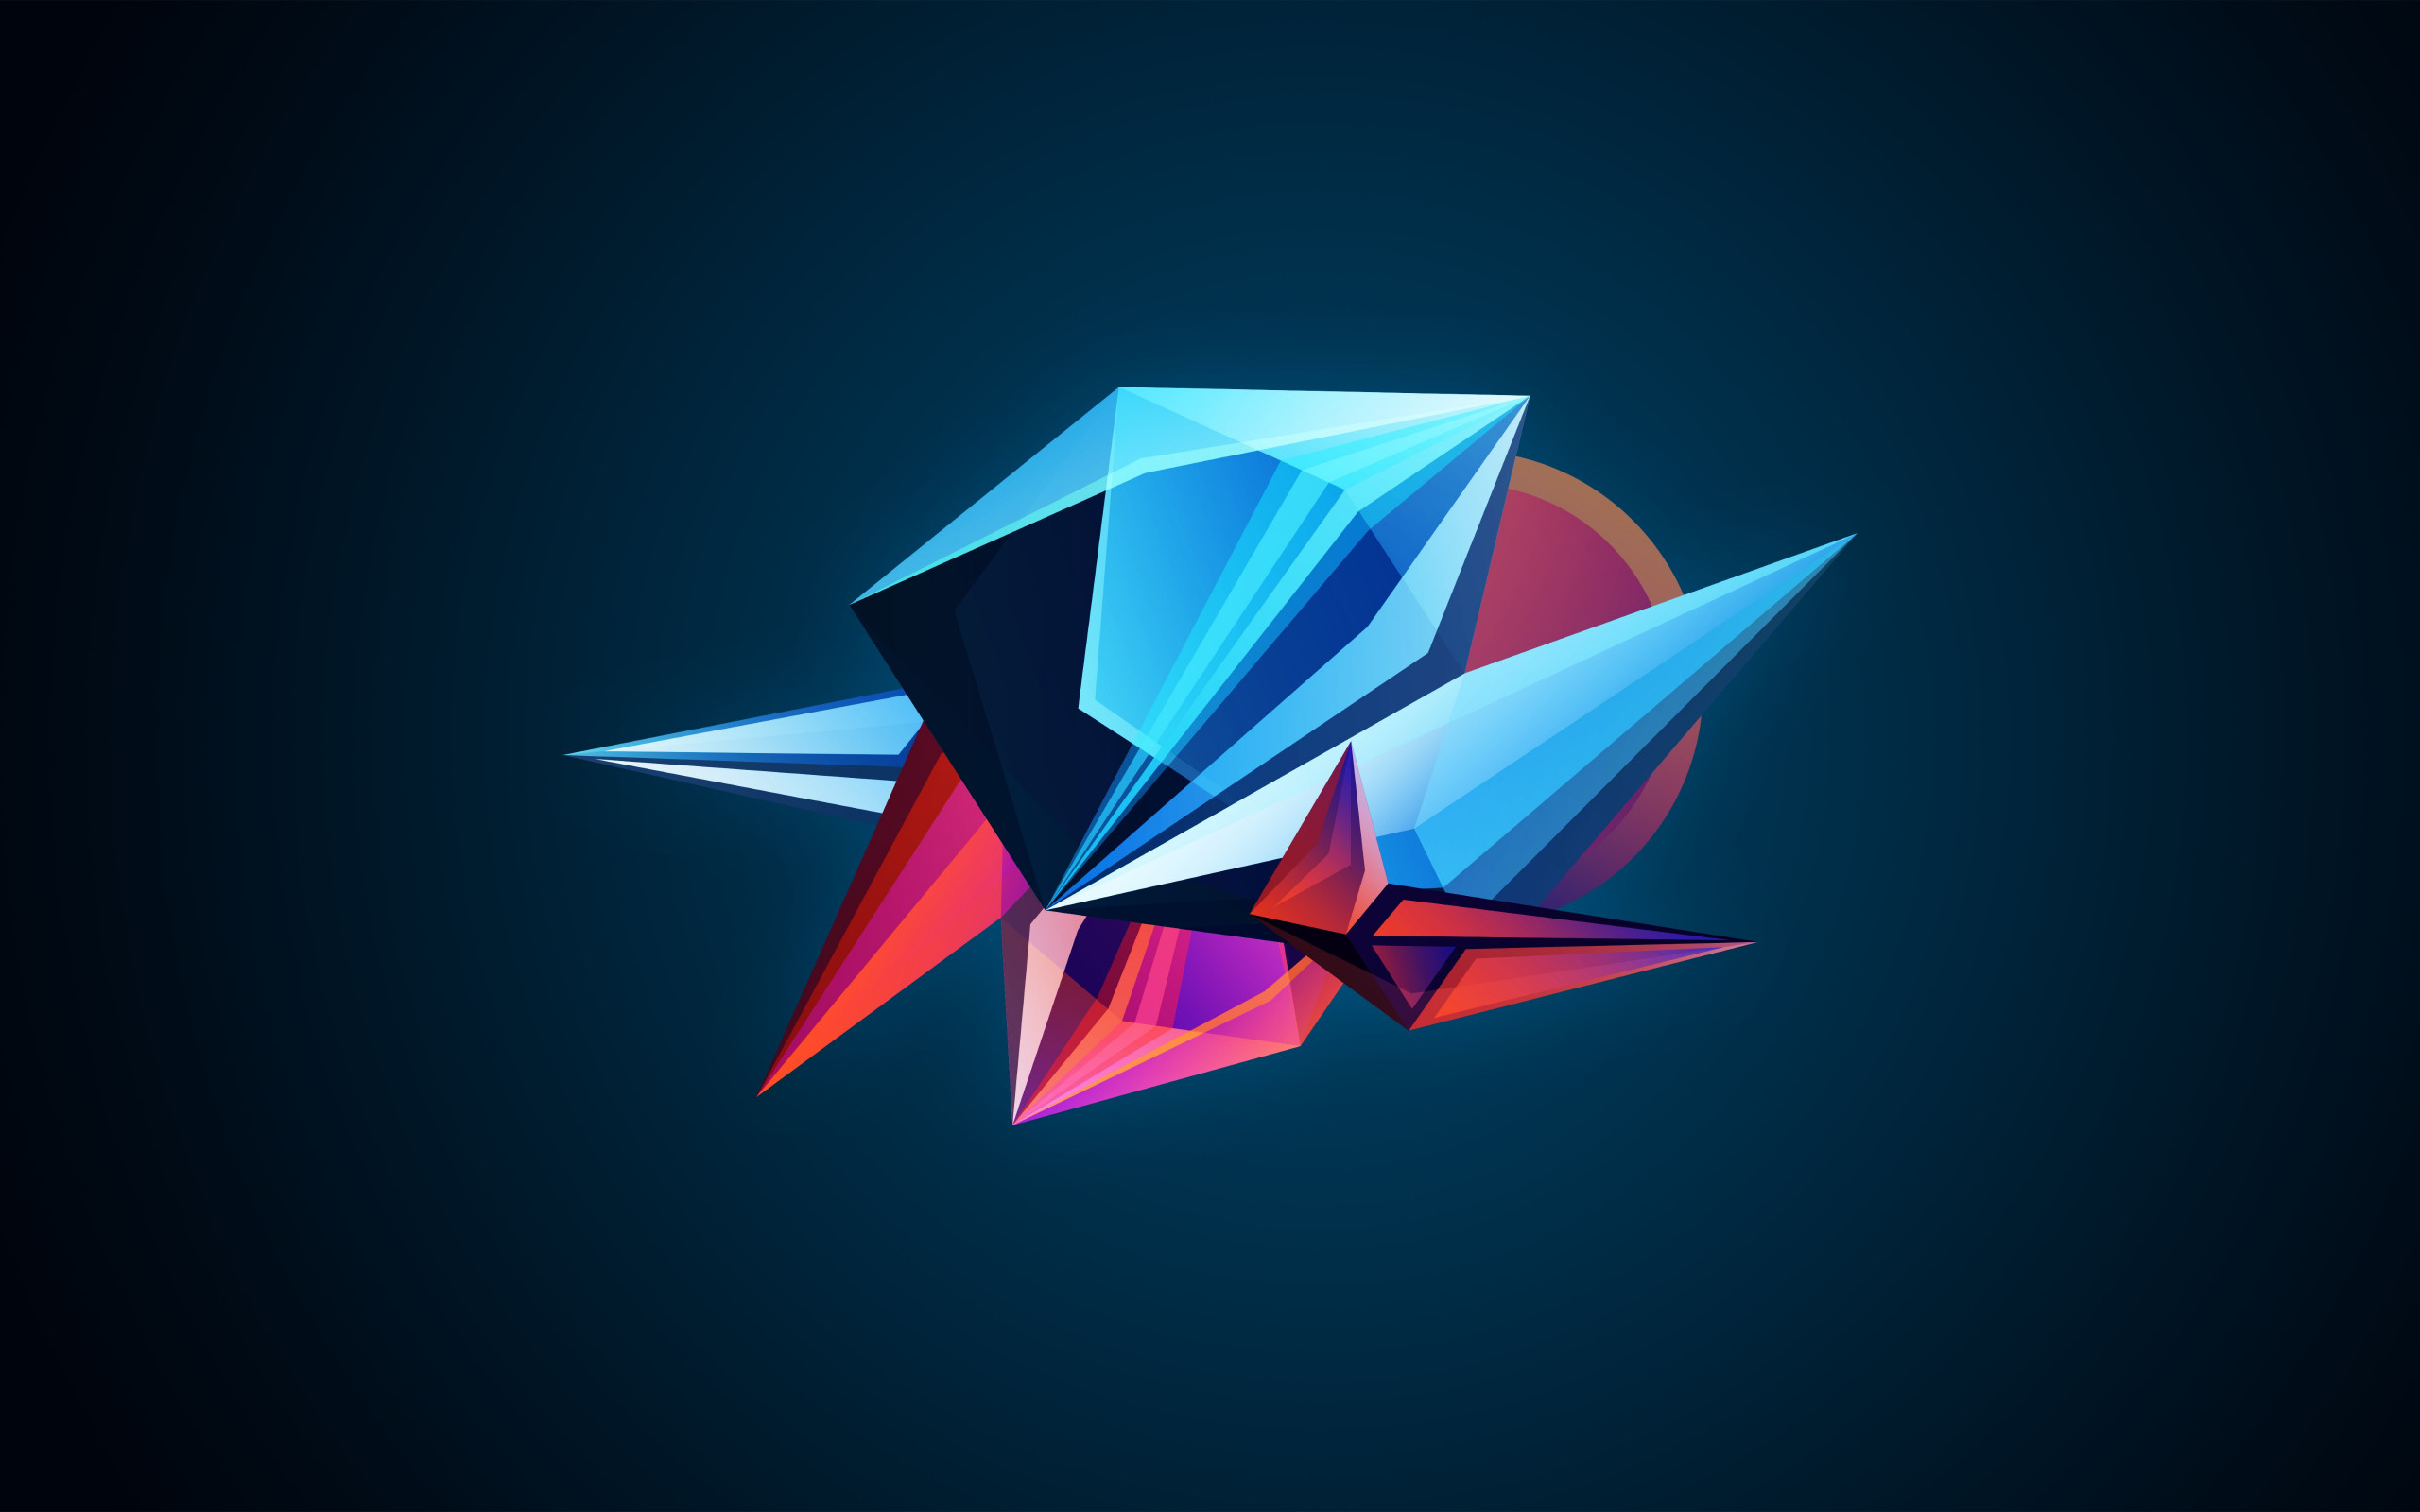 Abstract 3D shapes wallpaper 2560x1600